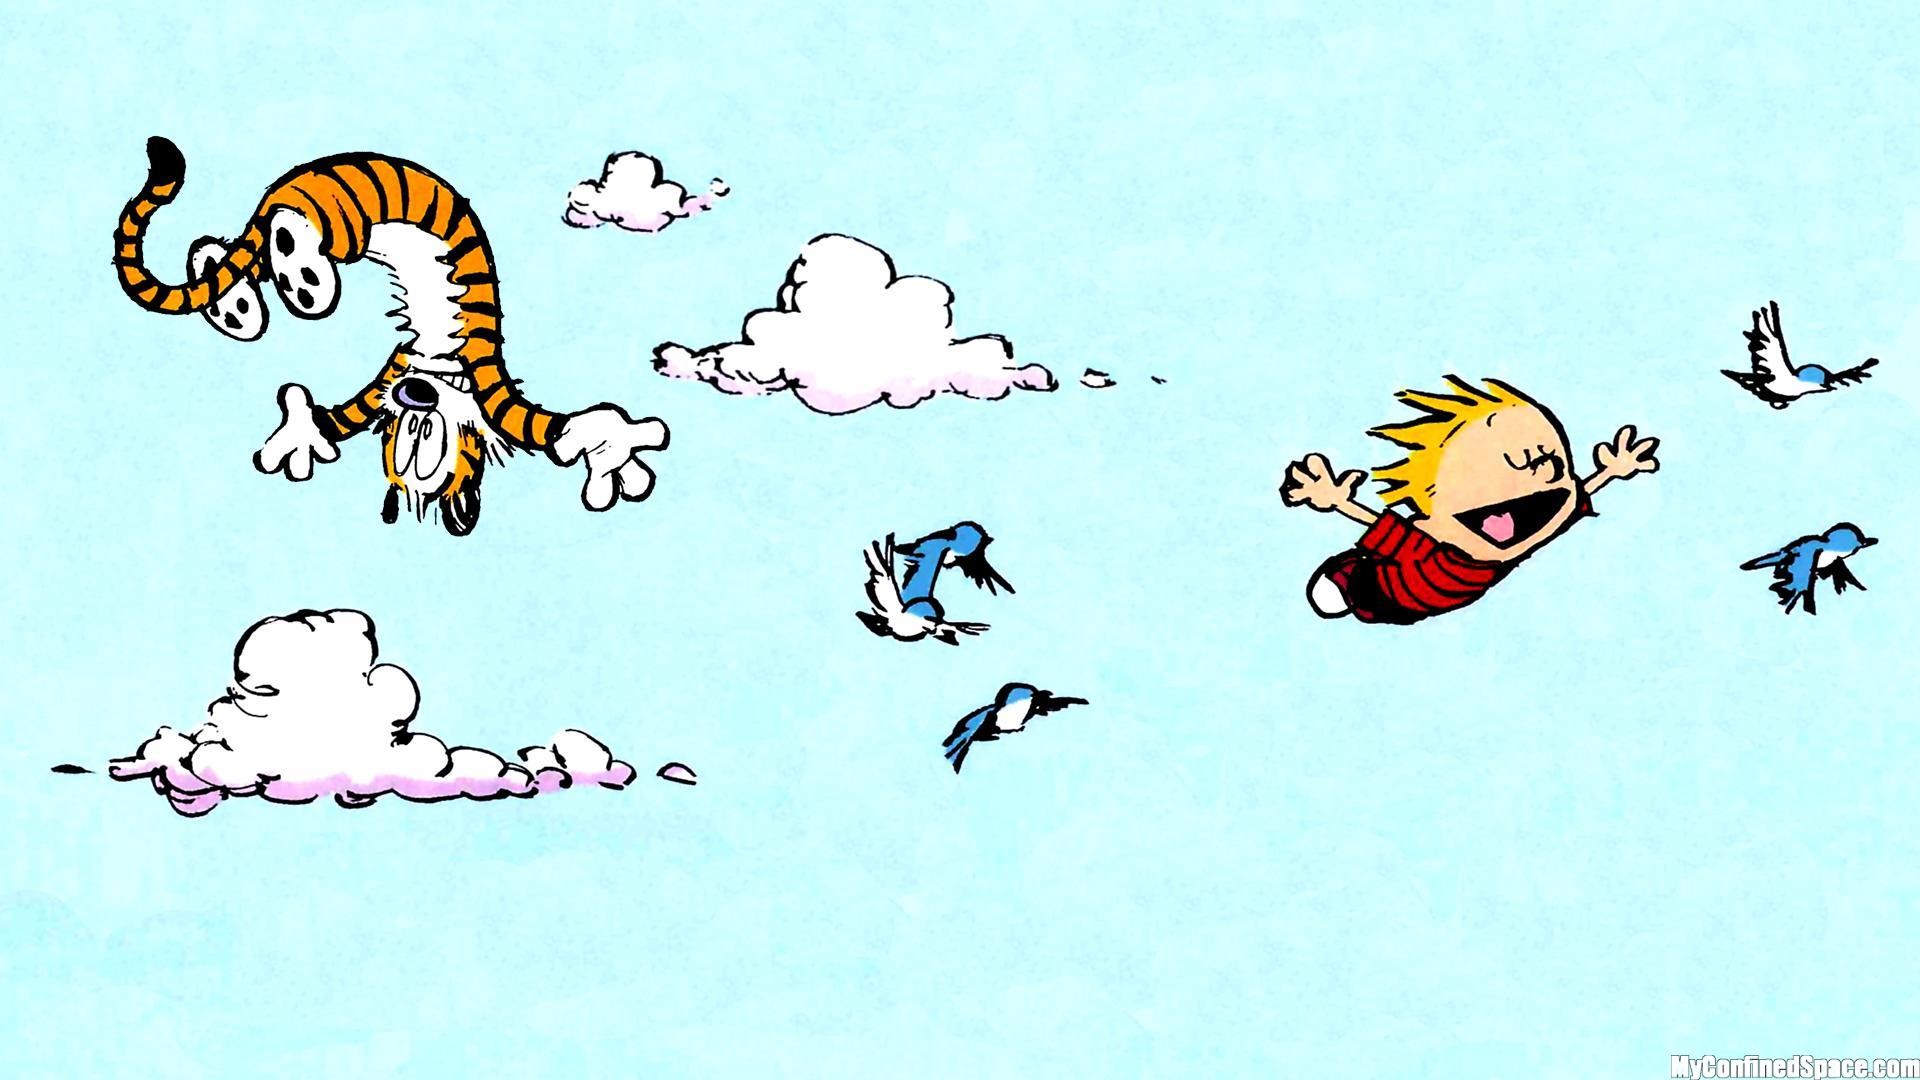 1920x1080 Quick edit on an old Calvin and Hobbes favorite 1920Ã1080 Calvin And Hobbes  Wallpapers